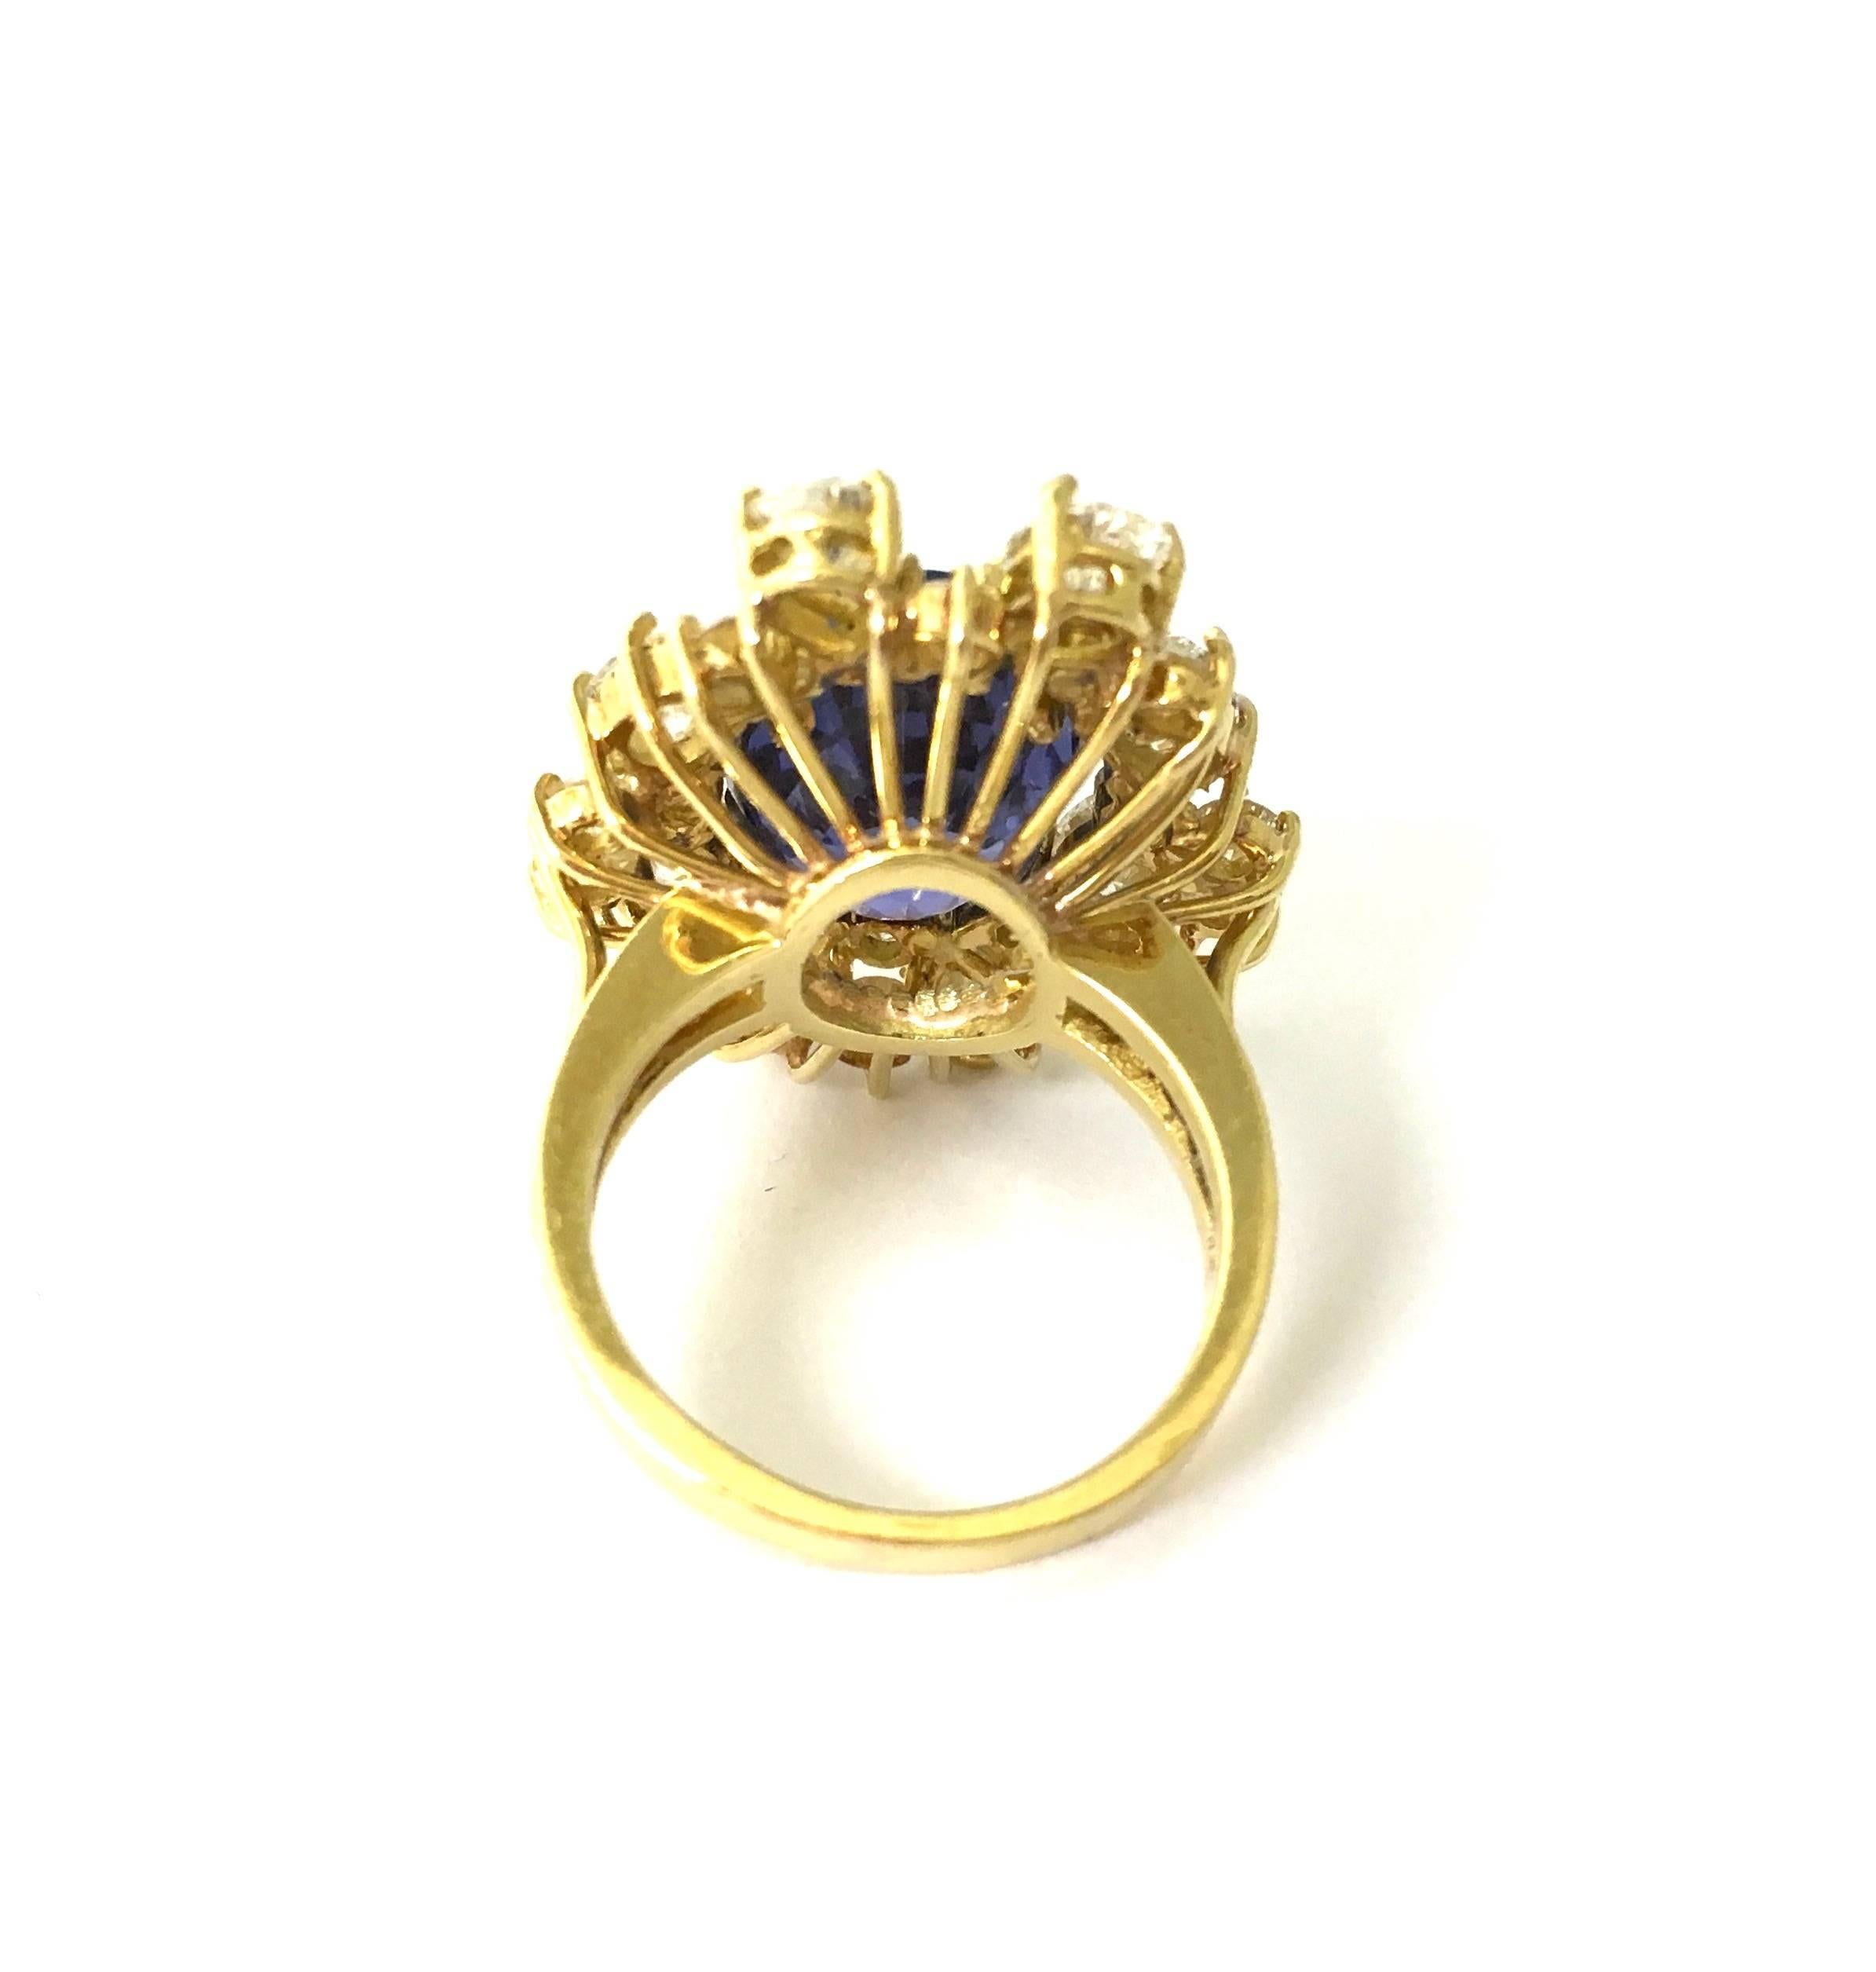 Crafted in 18K yellow gold, featuring an oval cut blue sapphire set within a bezel of pear shape, oval and round brilliant cut diamonds, supported by 2.5 mm wide band. 
Sapphire: 12.67 x 10.7 x 7.18 mm Ceylon no heat sapphire, AGL Report#